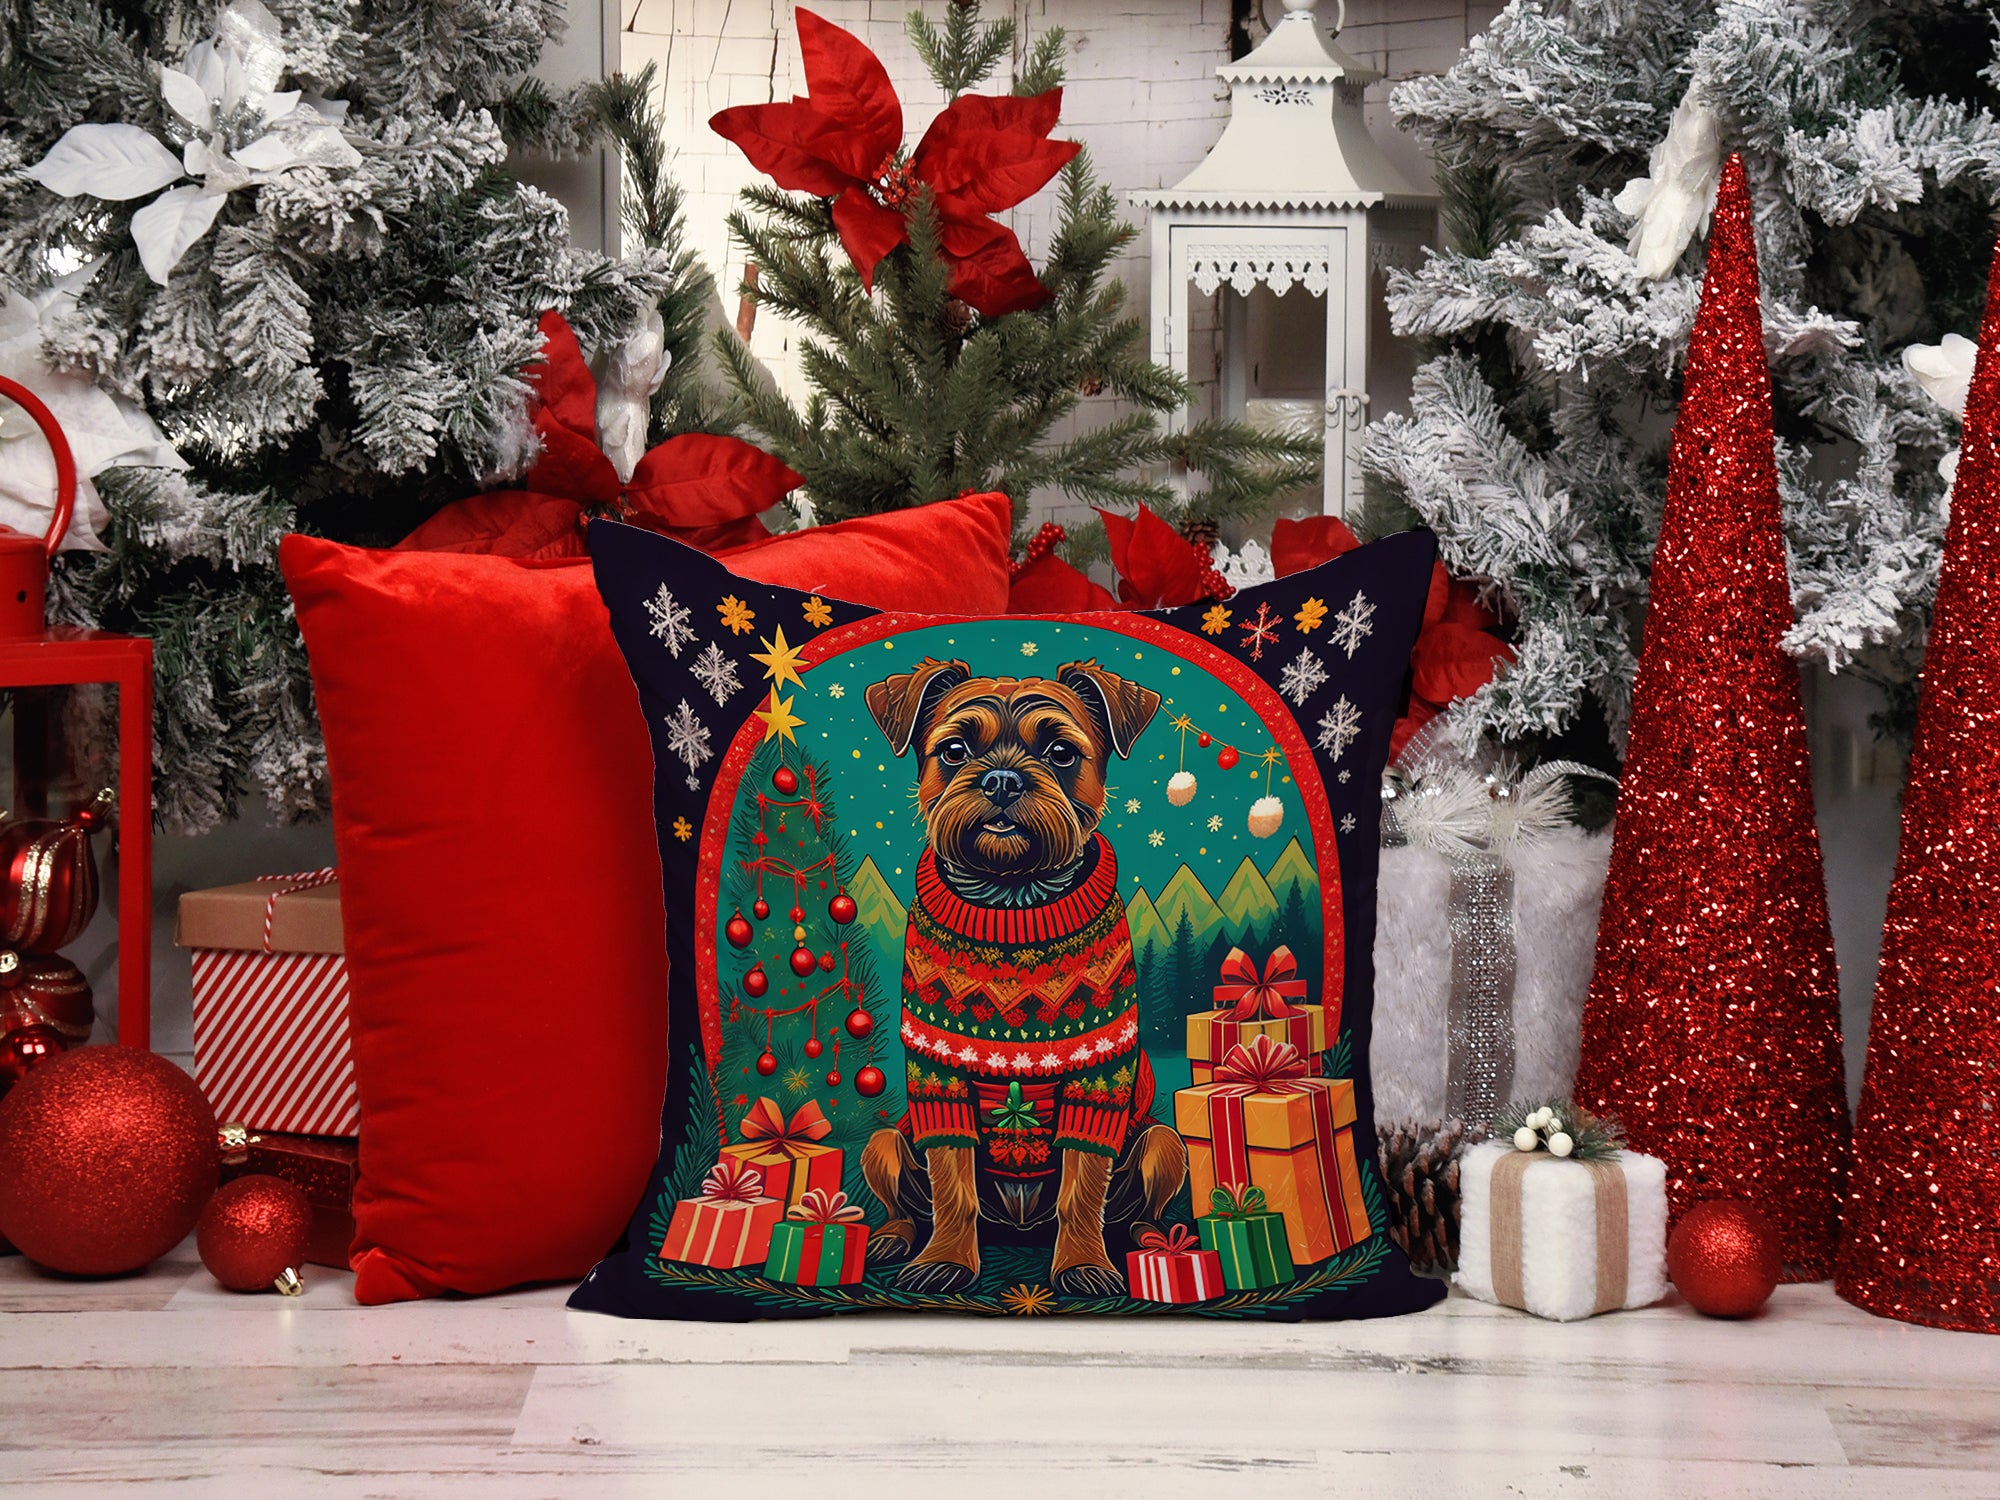 Buy this Border Terrier Christmas Fabric Decorative Pillow